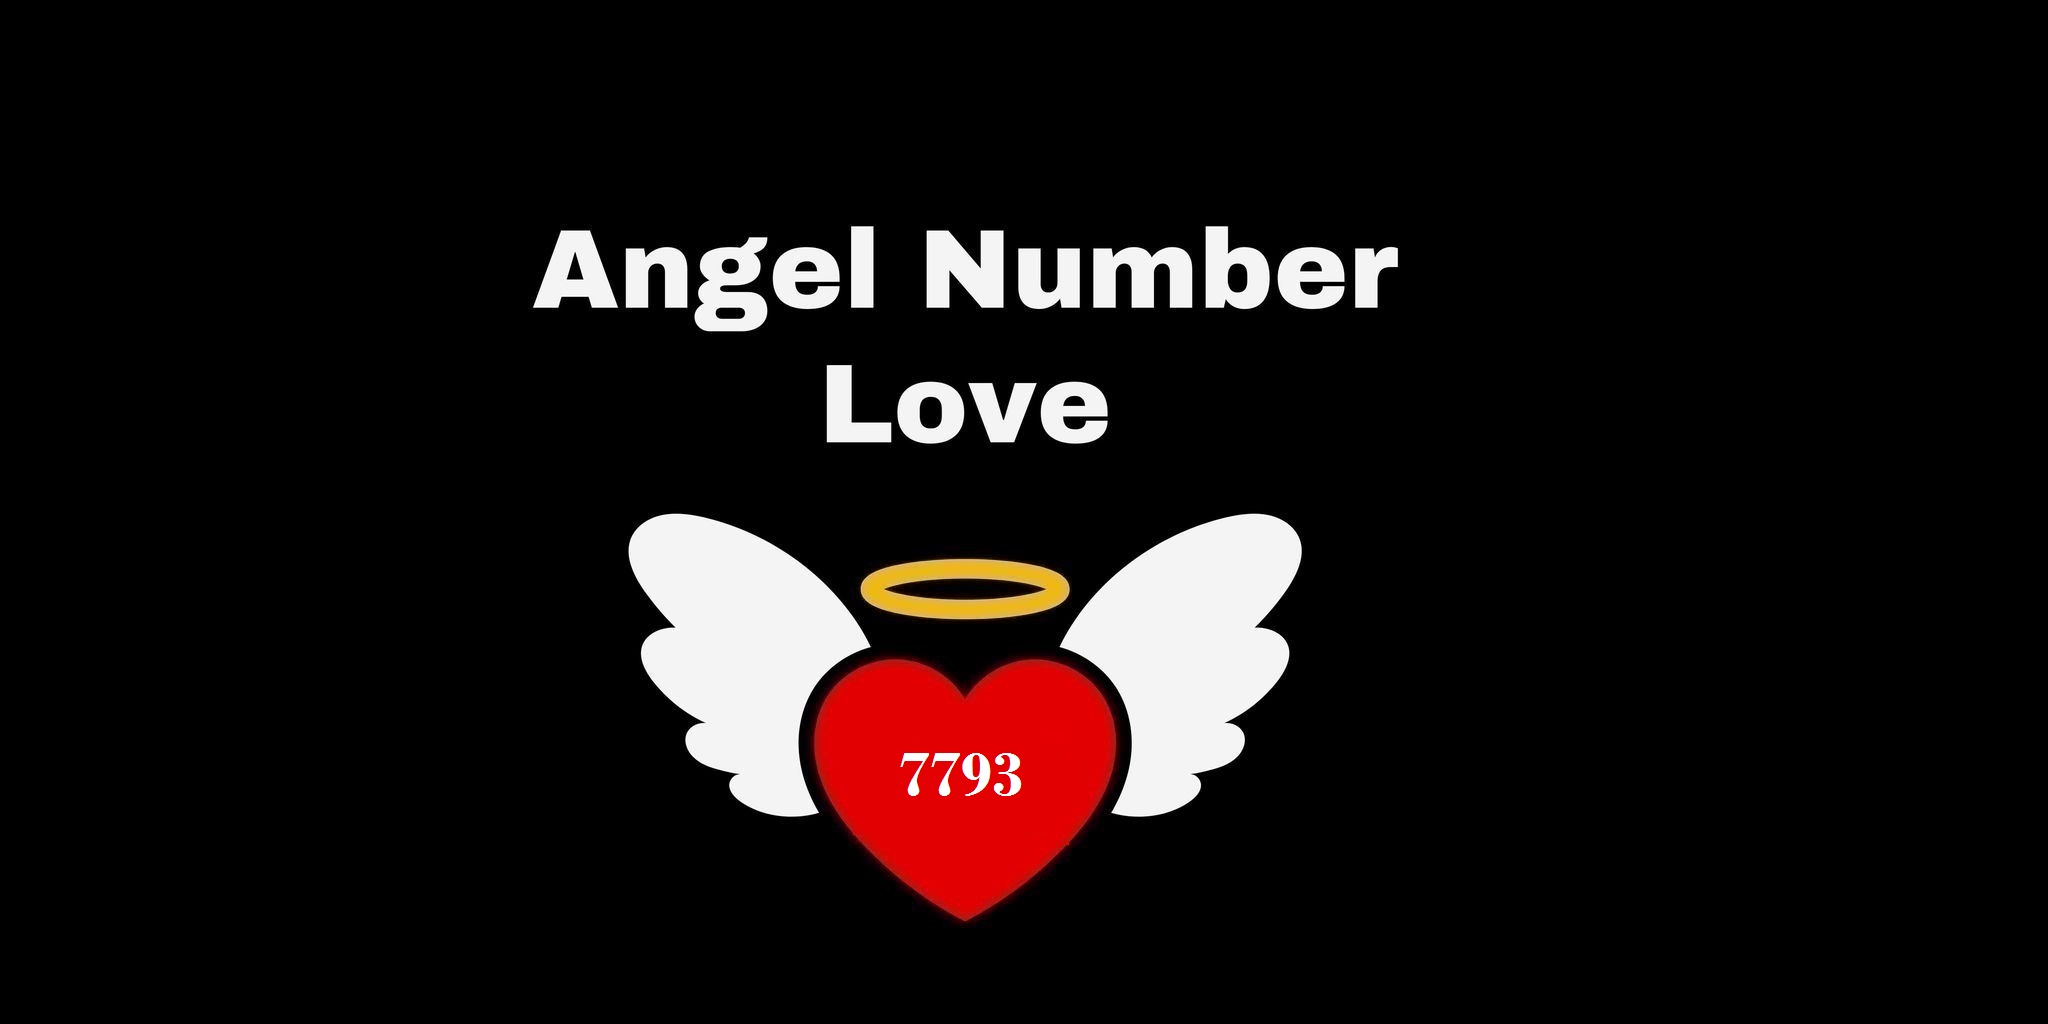 7793 Angel Number Meaning In Love